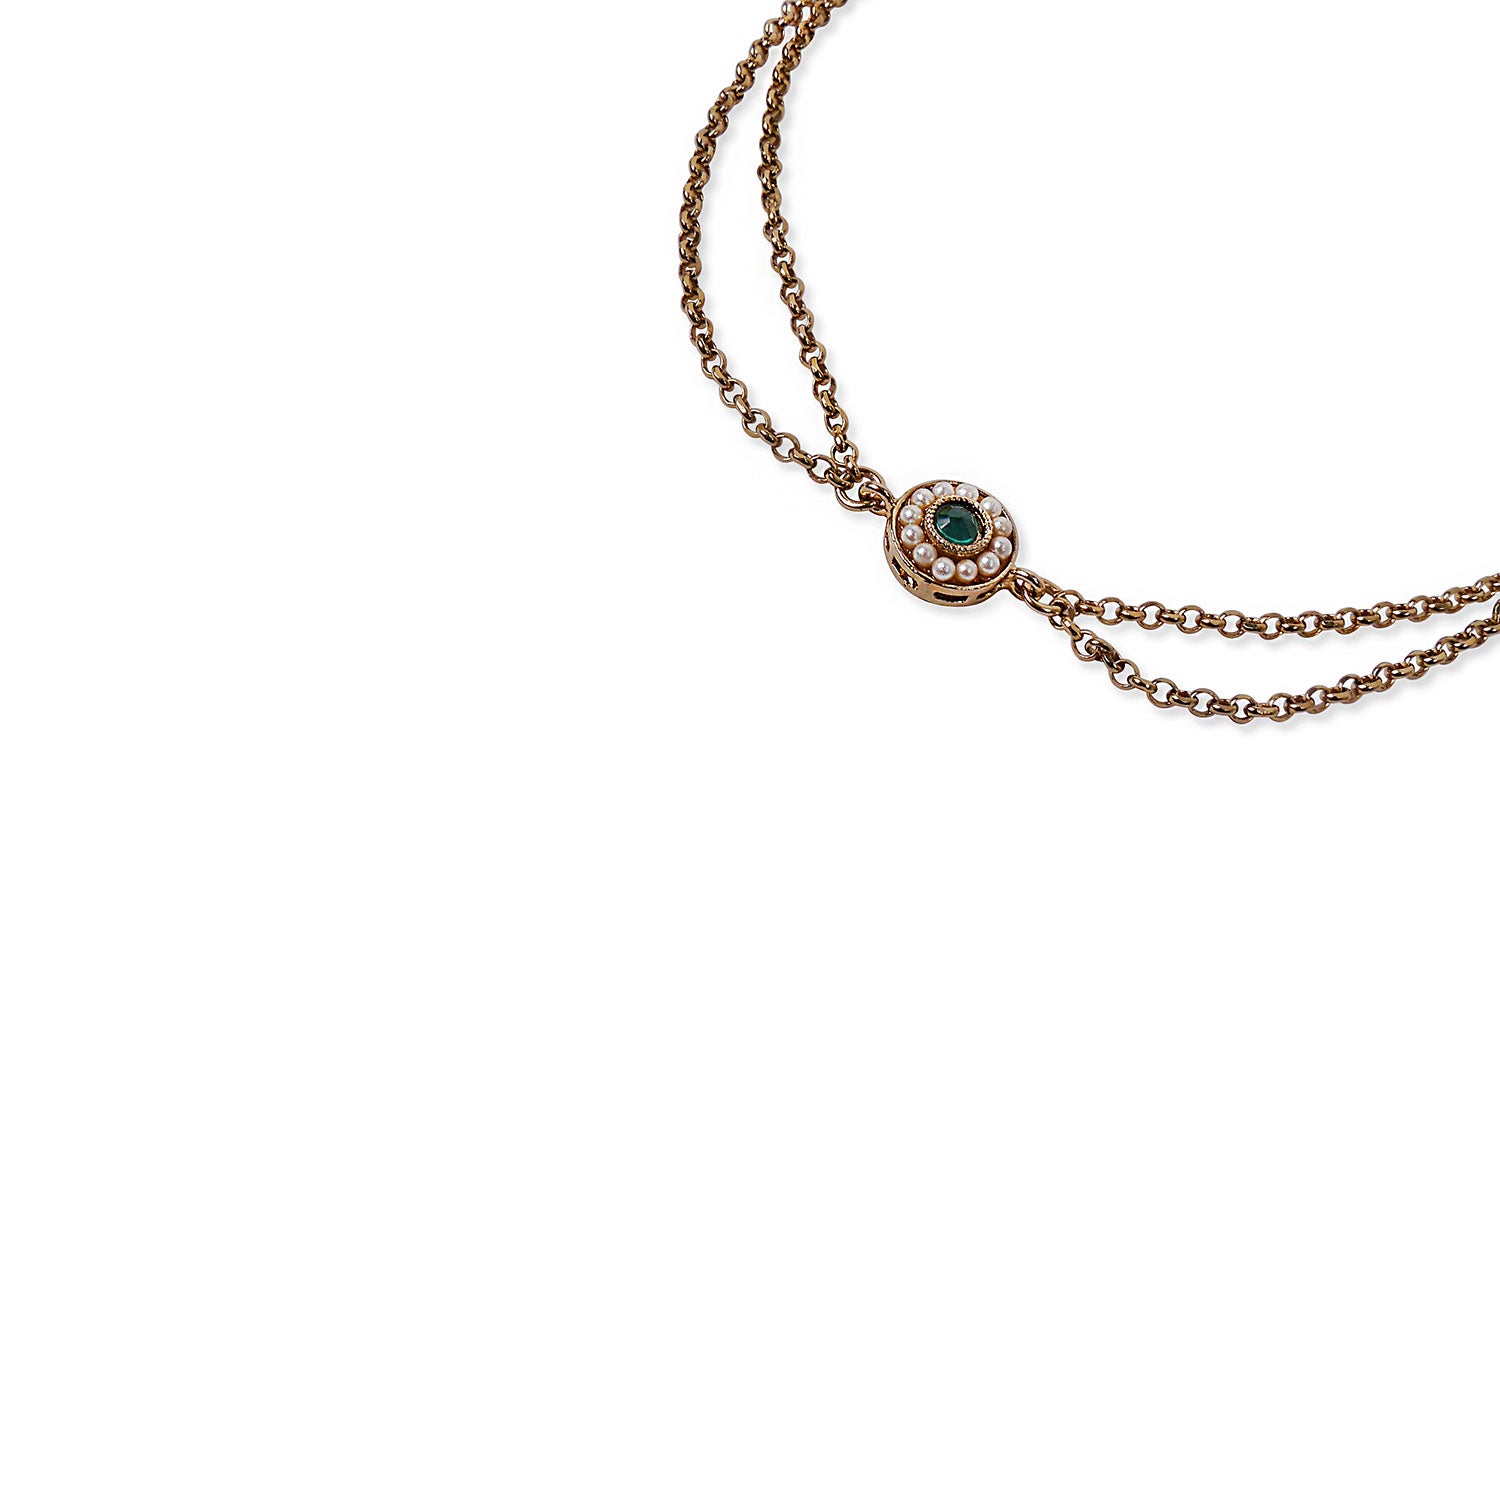 Leela Double Chain Anklet in Jade